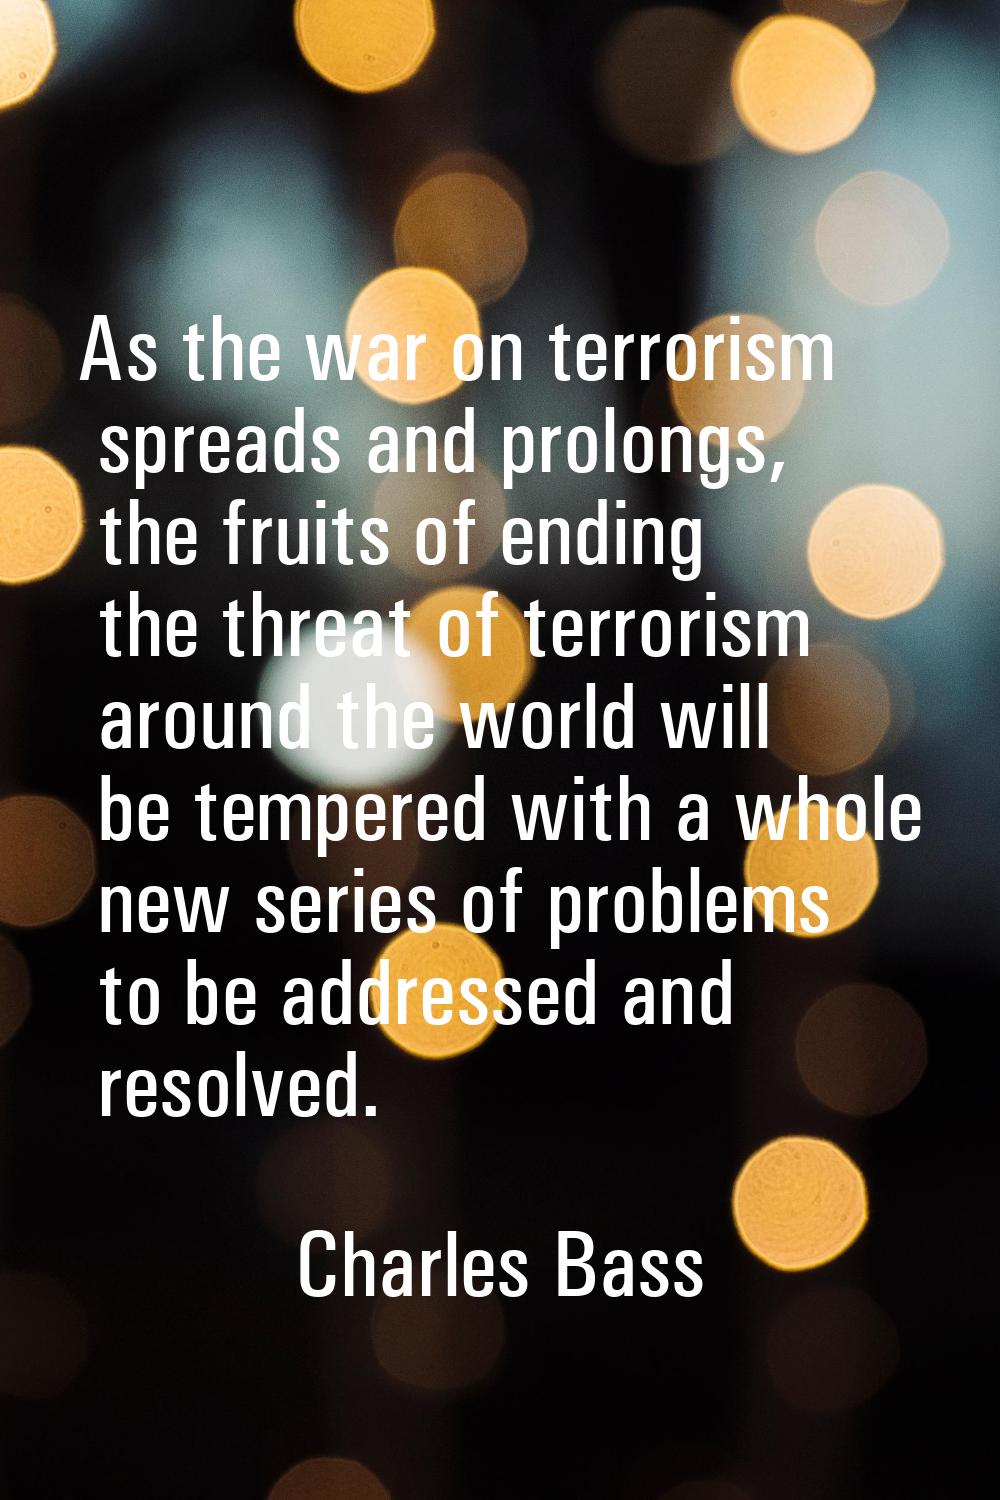 As the war on terrorism spreads and prolongs, the fruits of ending the threat of terrorism around t